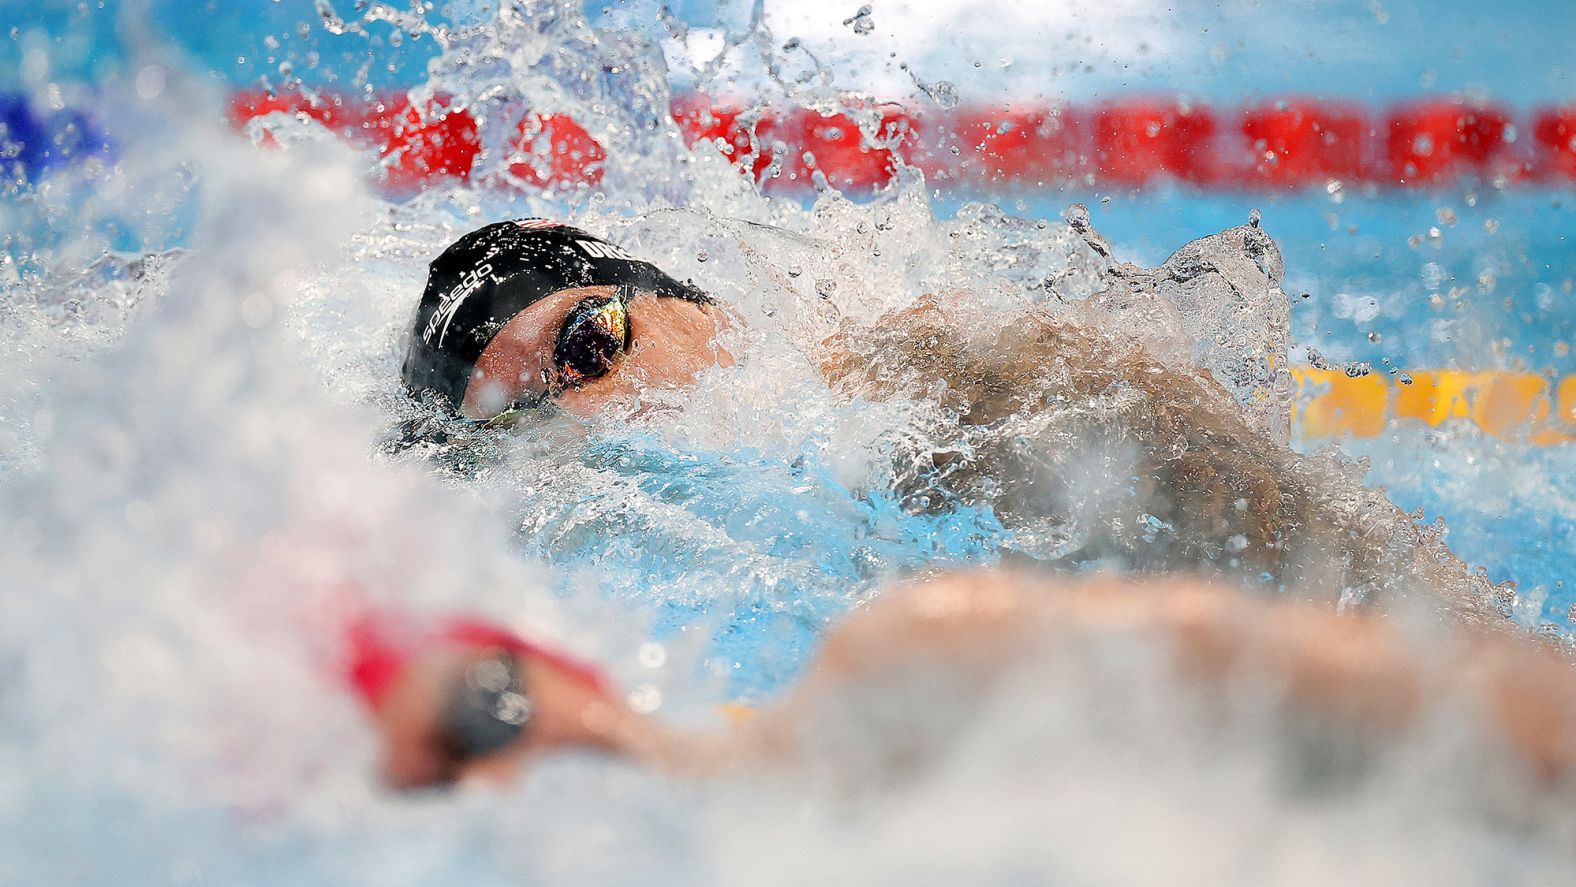 American swimmer Caeleb Dressel, top, competes in the 100-meter freestyle final on July 29. With an <a href="index.php?page=&url=https%3A%2F%2Fwww.cnn.com%2Fworld%2Flive-news%2Ftokyo-2020-olympics-07-28-21-spt%2Fh_63baf0a0f201fe751bcbe93b78f86bc7" target="_blank">Olympic record time</a> of 47.02 seconds, he won his fourth career gold medal and his second in Tokyo. He won the race by just .06 seconds.